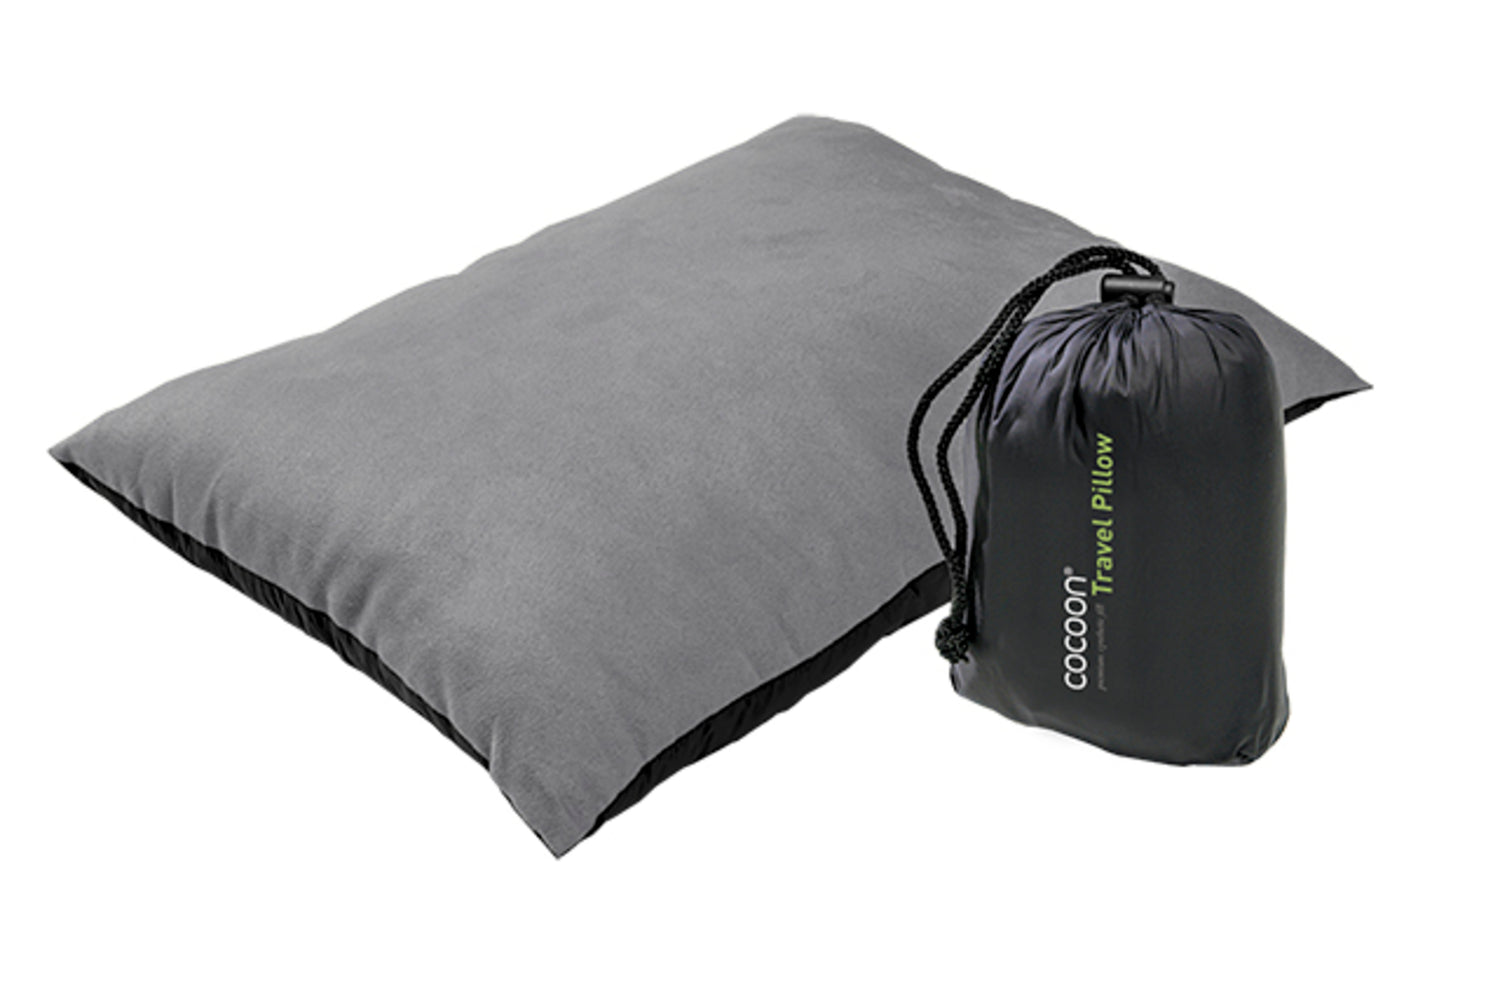 Cocoon Synthetic Pillow L charcoal/smoke grey